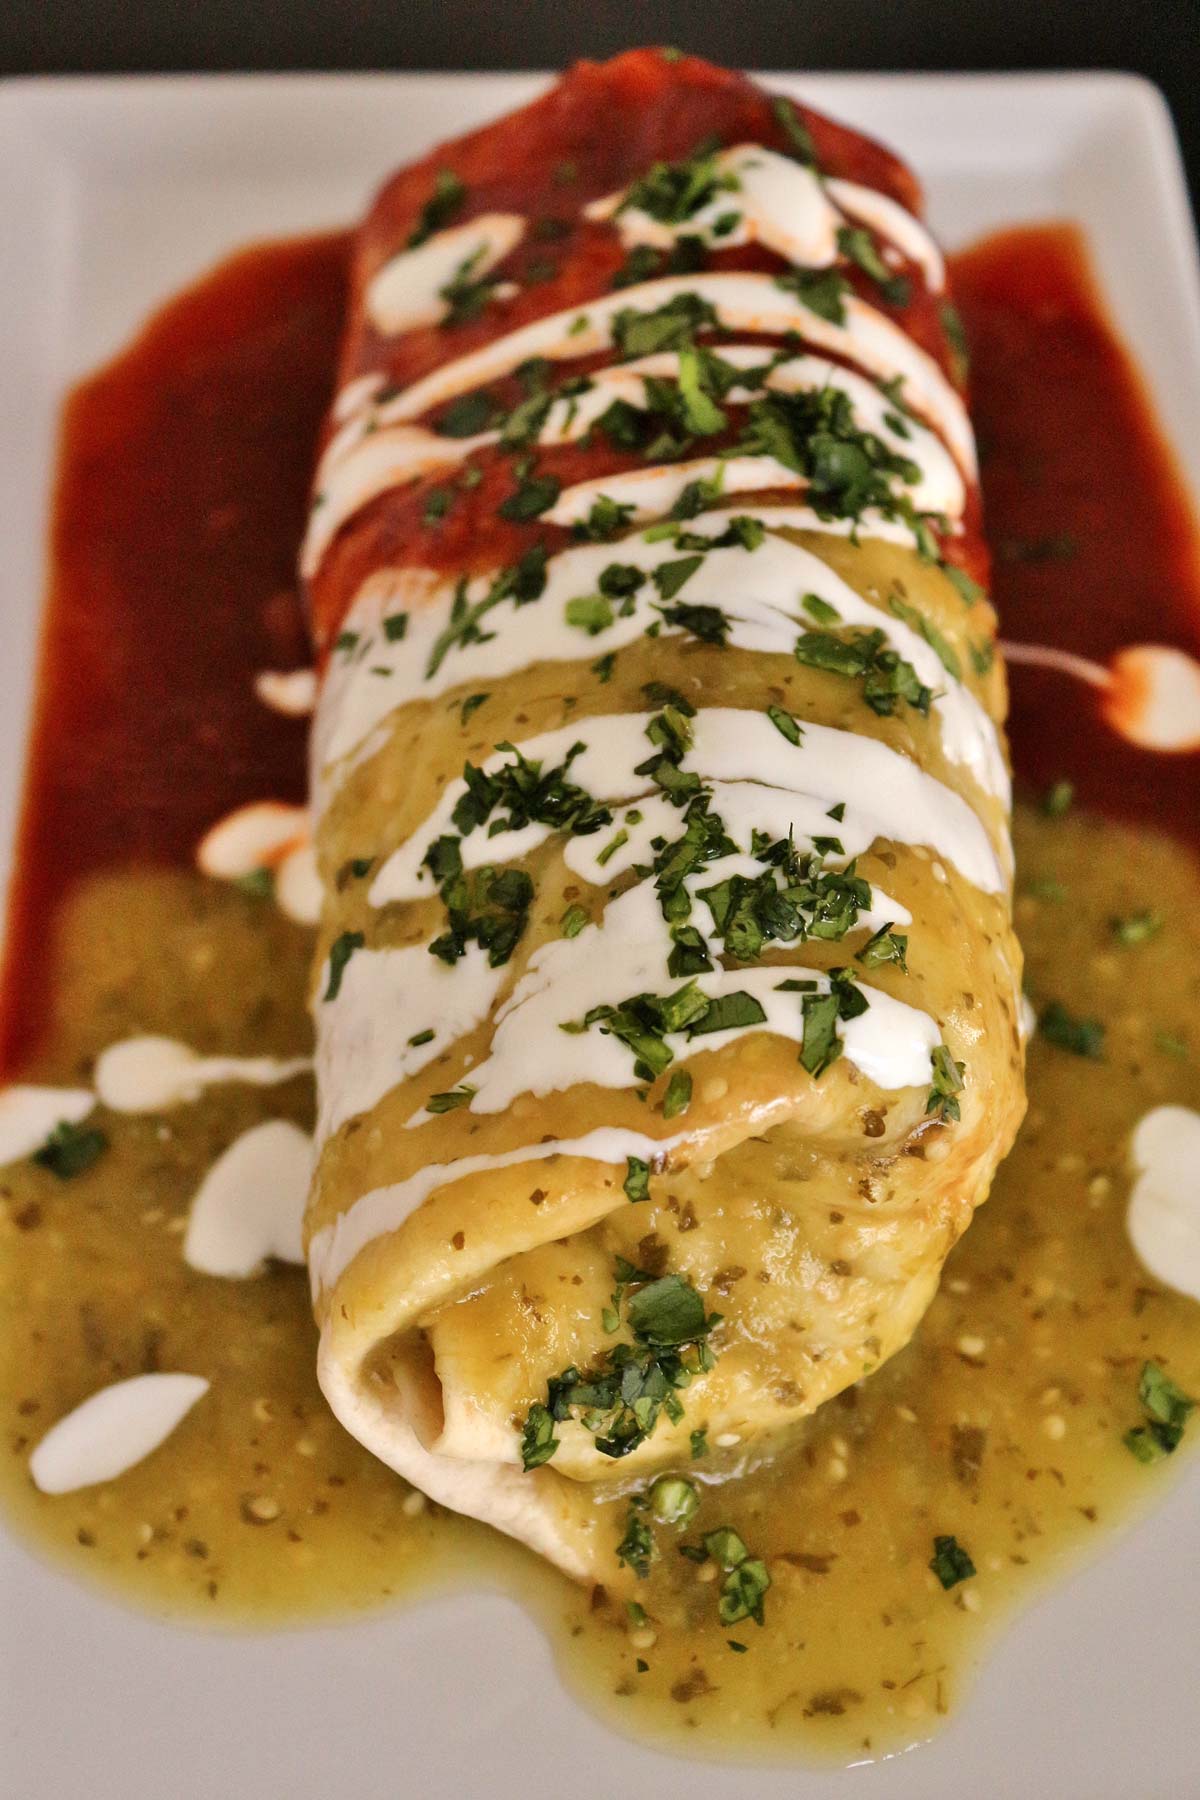 A burrito topped with green, red, and white sauces on a white rectangular plate.